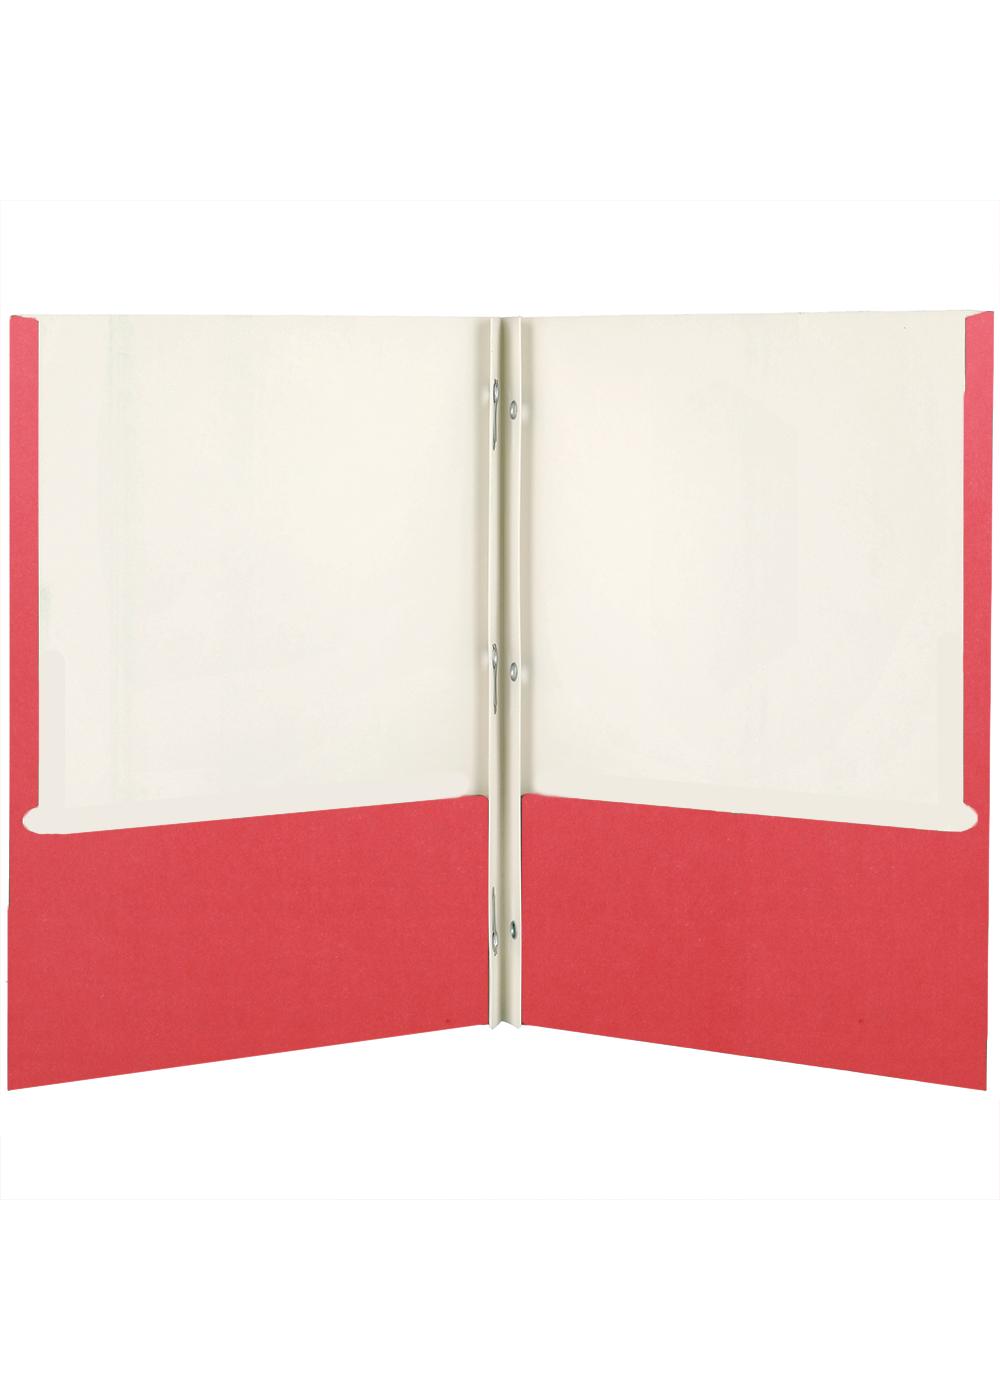 H-E-B Pocket Paper Folder with Prongs - Red; image 2 of 2